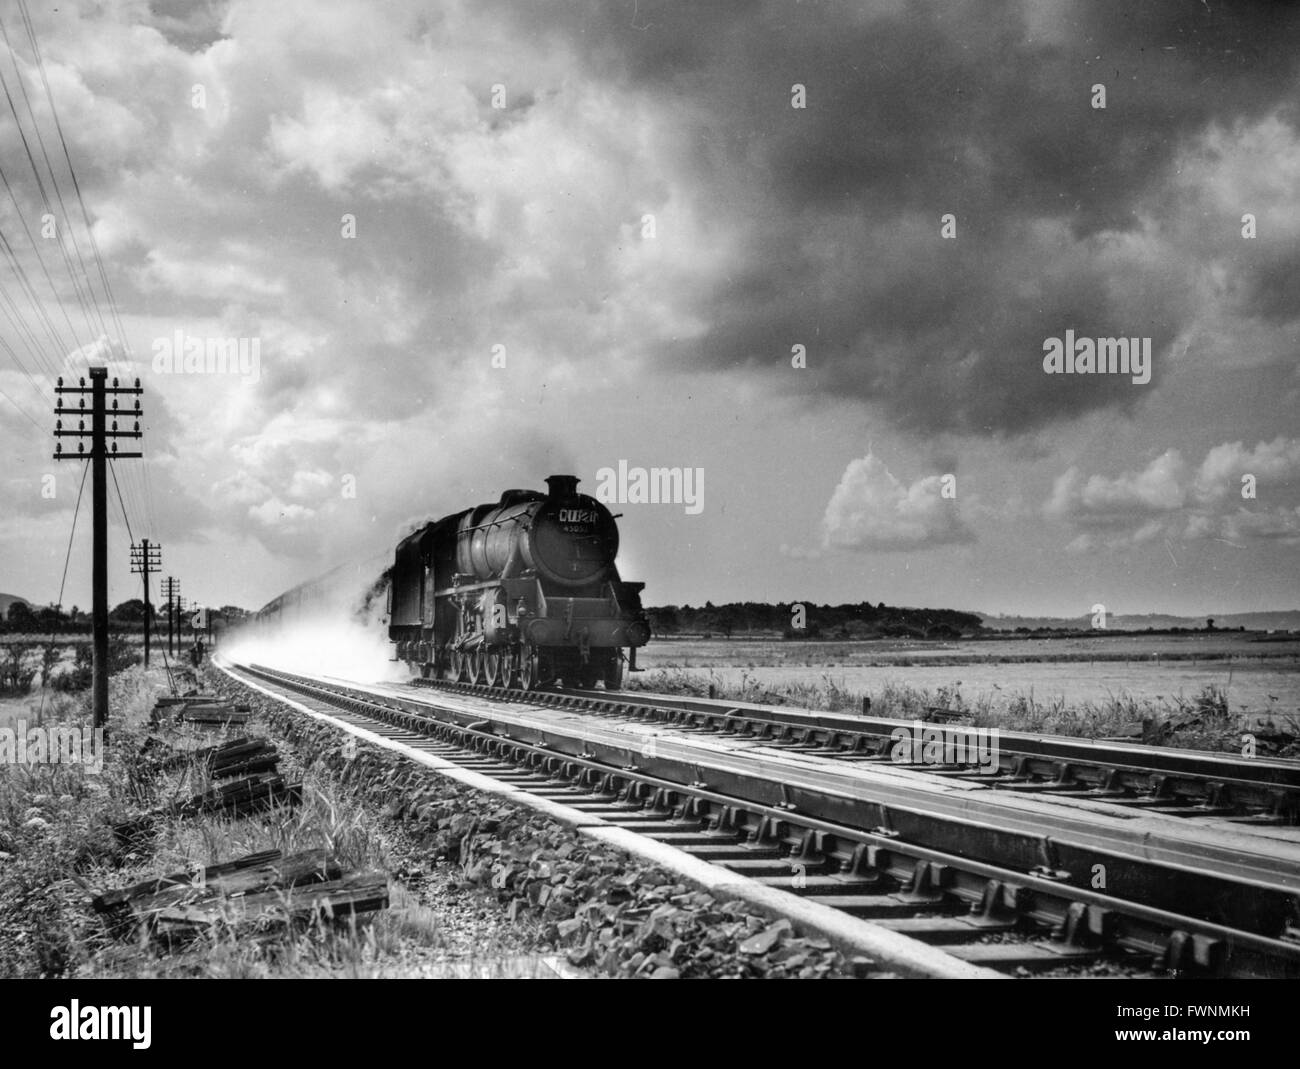 Stanier Black 5 No 5057 picks up water at speed. The location is possibly Dunsmore troughs between Rugby and Nuneaton. Stock Photo